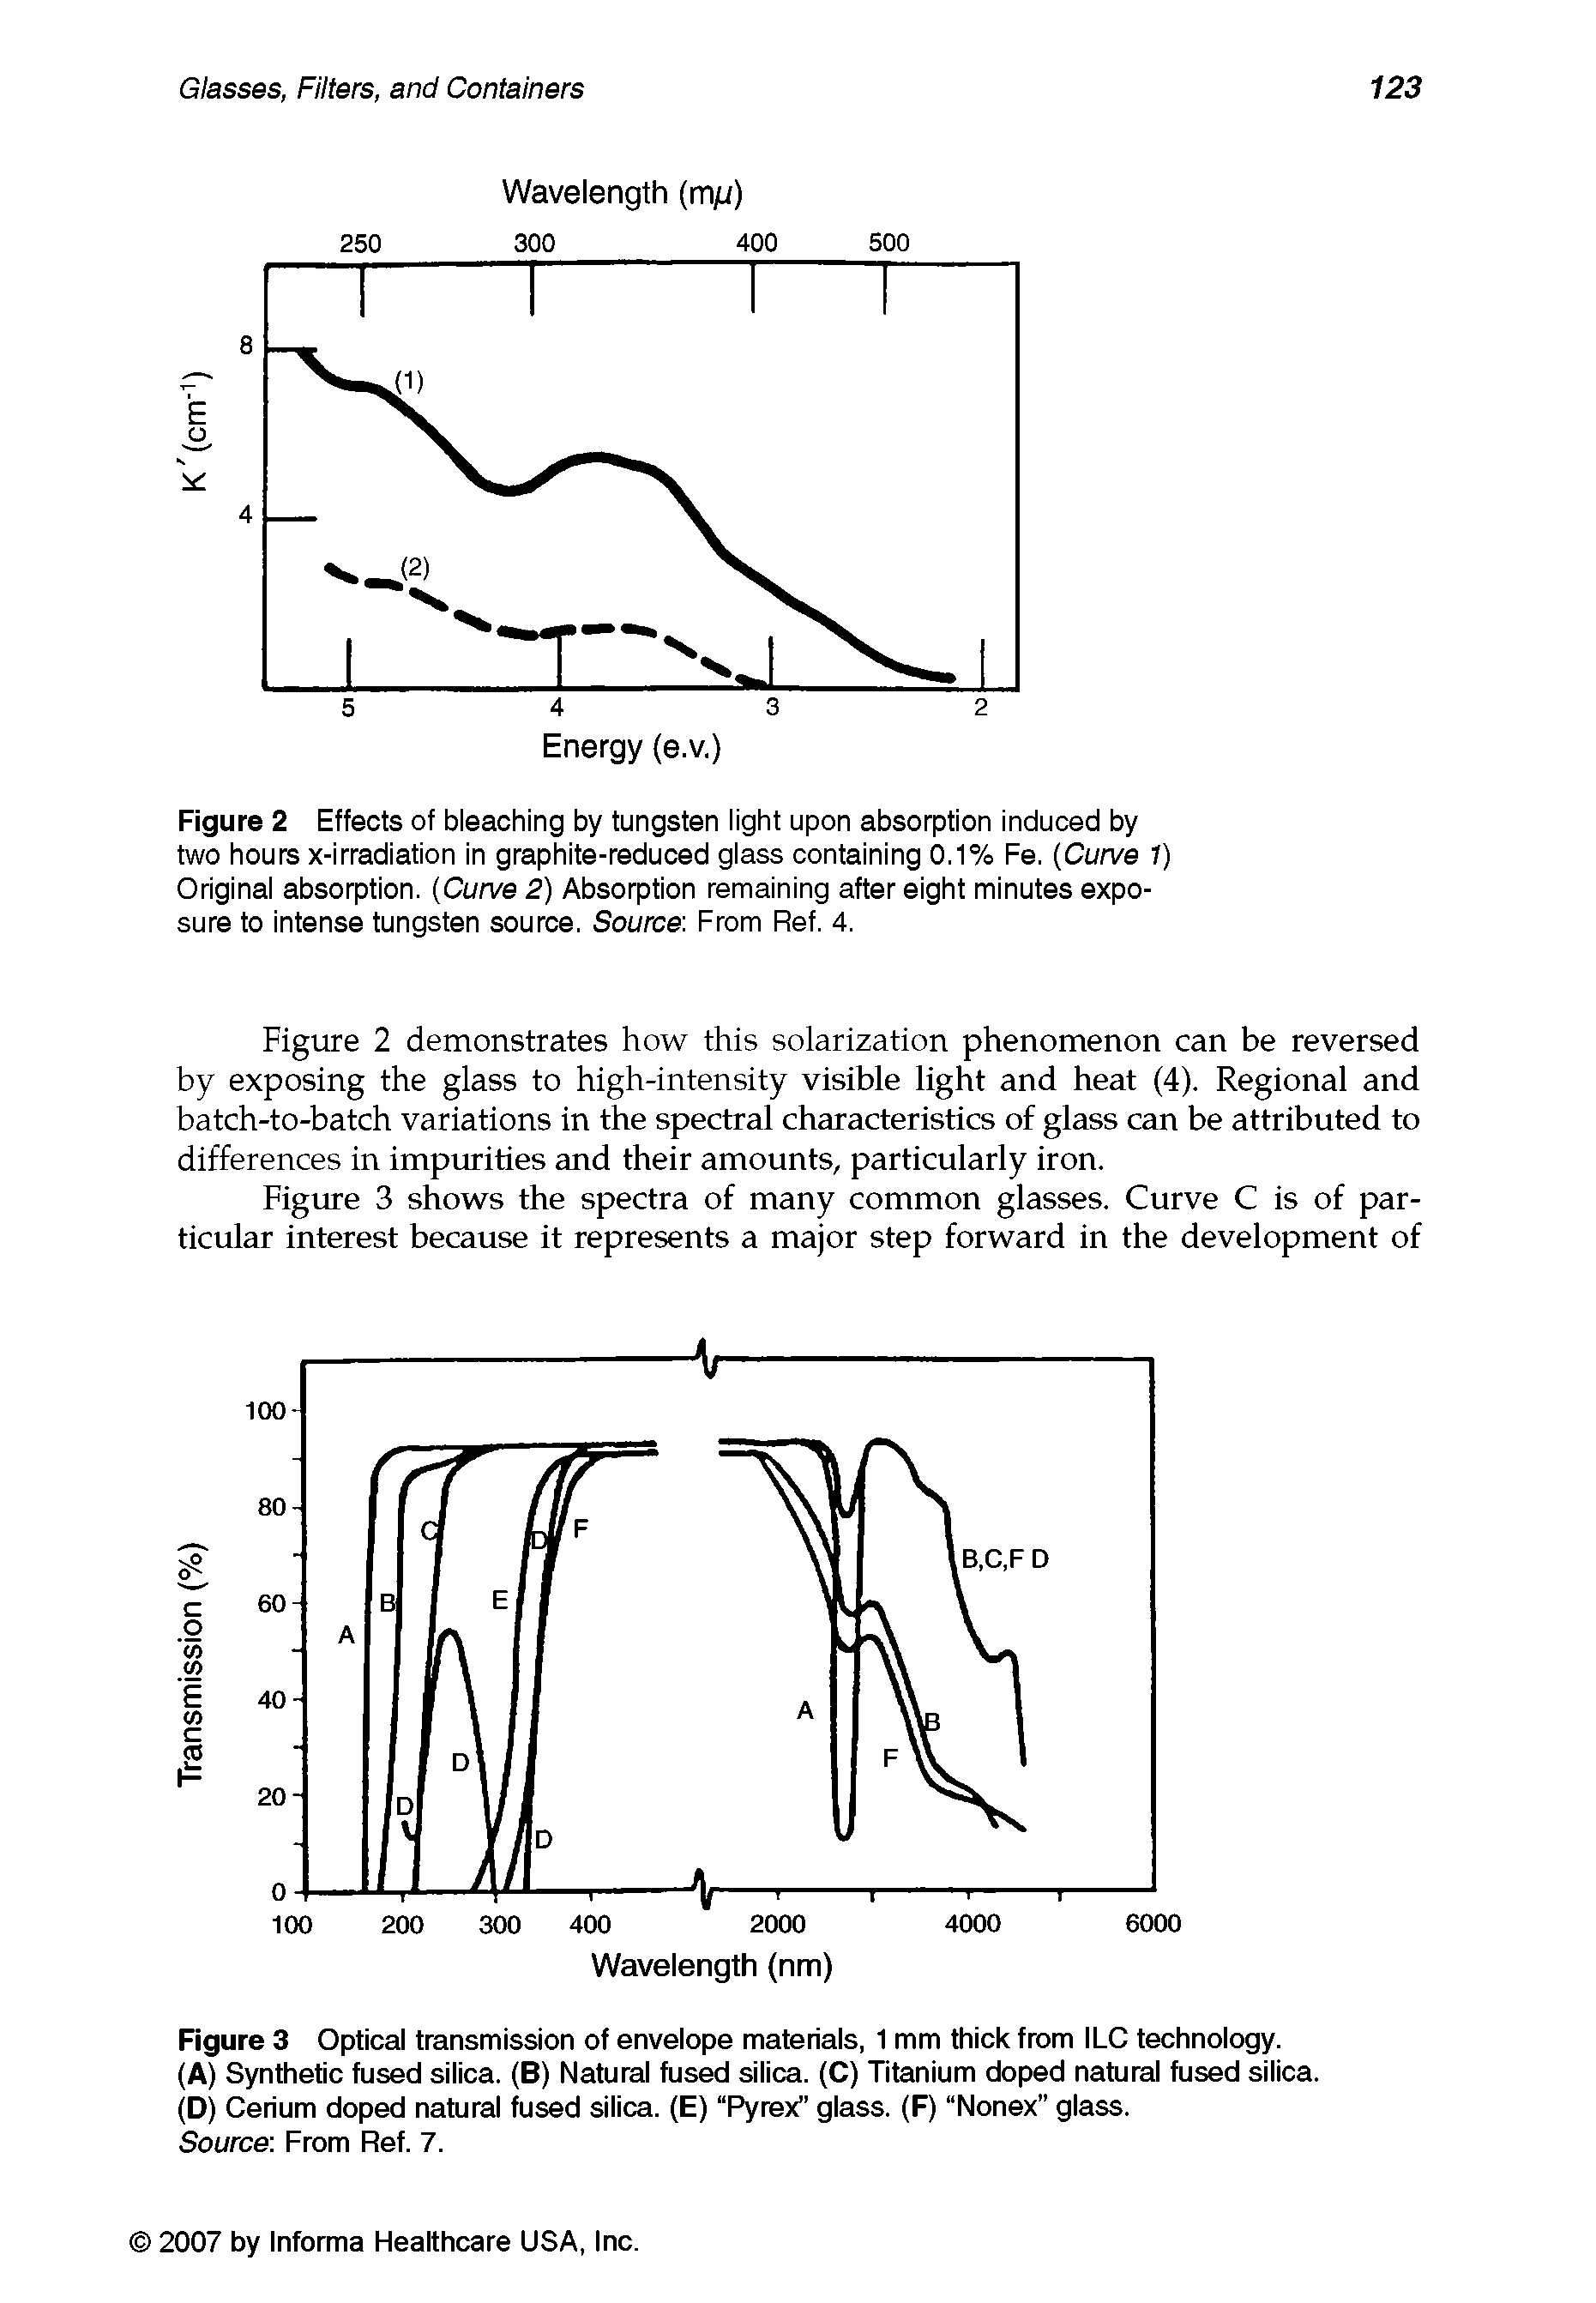 Figure 2 Effects of bleaching by tungsten light upon absorption induced by two hours x-irradiation in graphite-reduced glass containing 0.1% Fe. Curve 1) Original absorption. (Curve 2) Absorption remaining after eight minutes exposure to intense tungsten source. Source From Ref. 4.